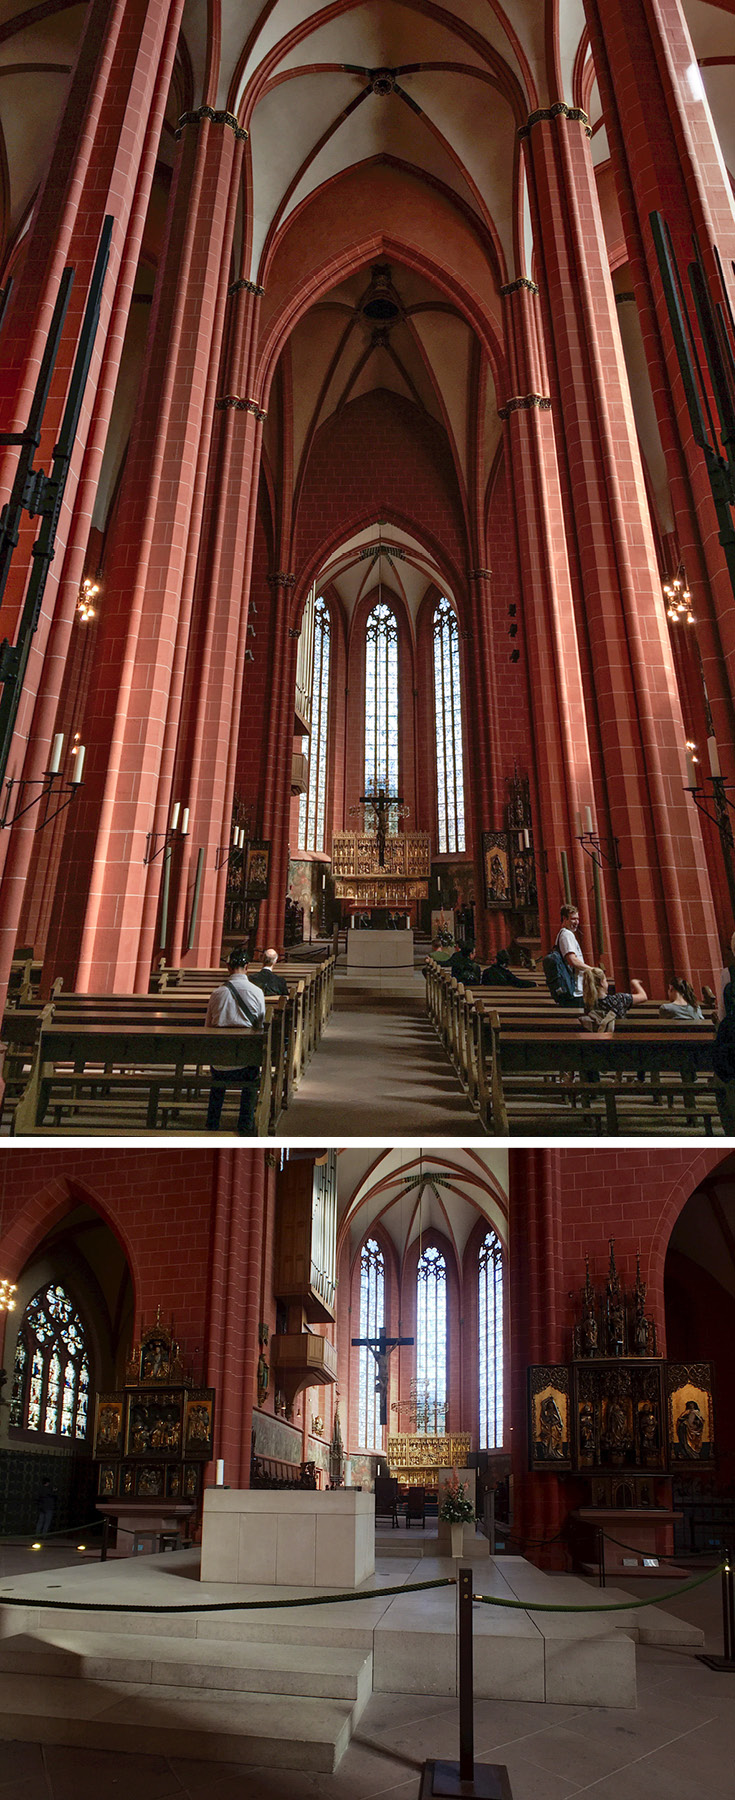 The red sandstone interior of St. Bartholomew's Imperial Cathedral in Frankfurt am Main, Germany